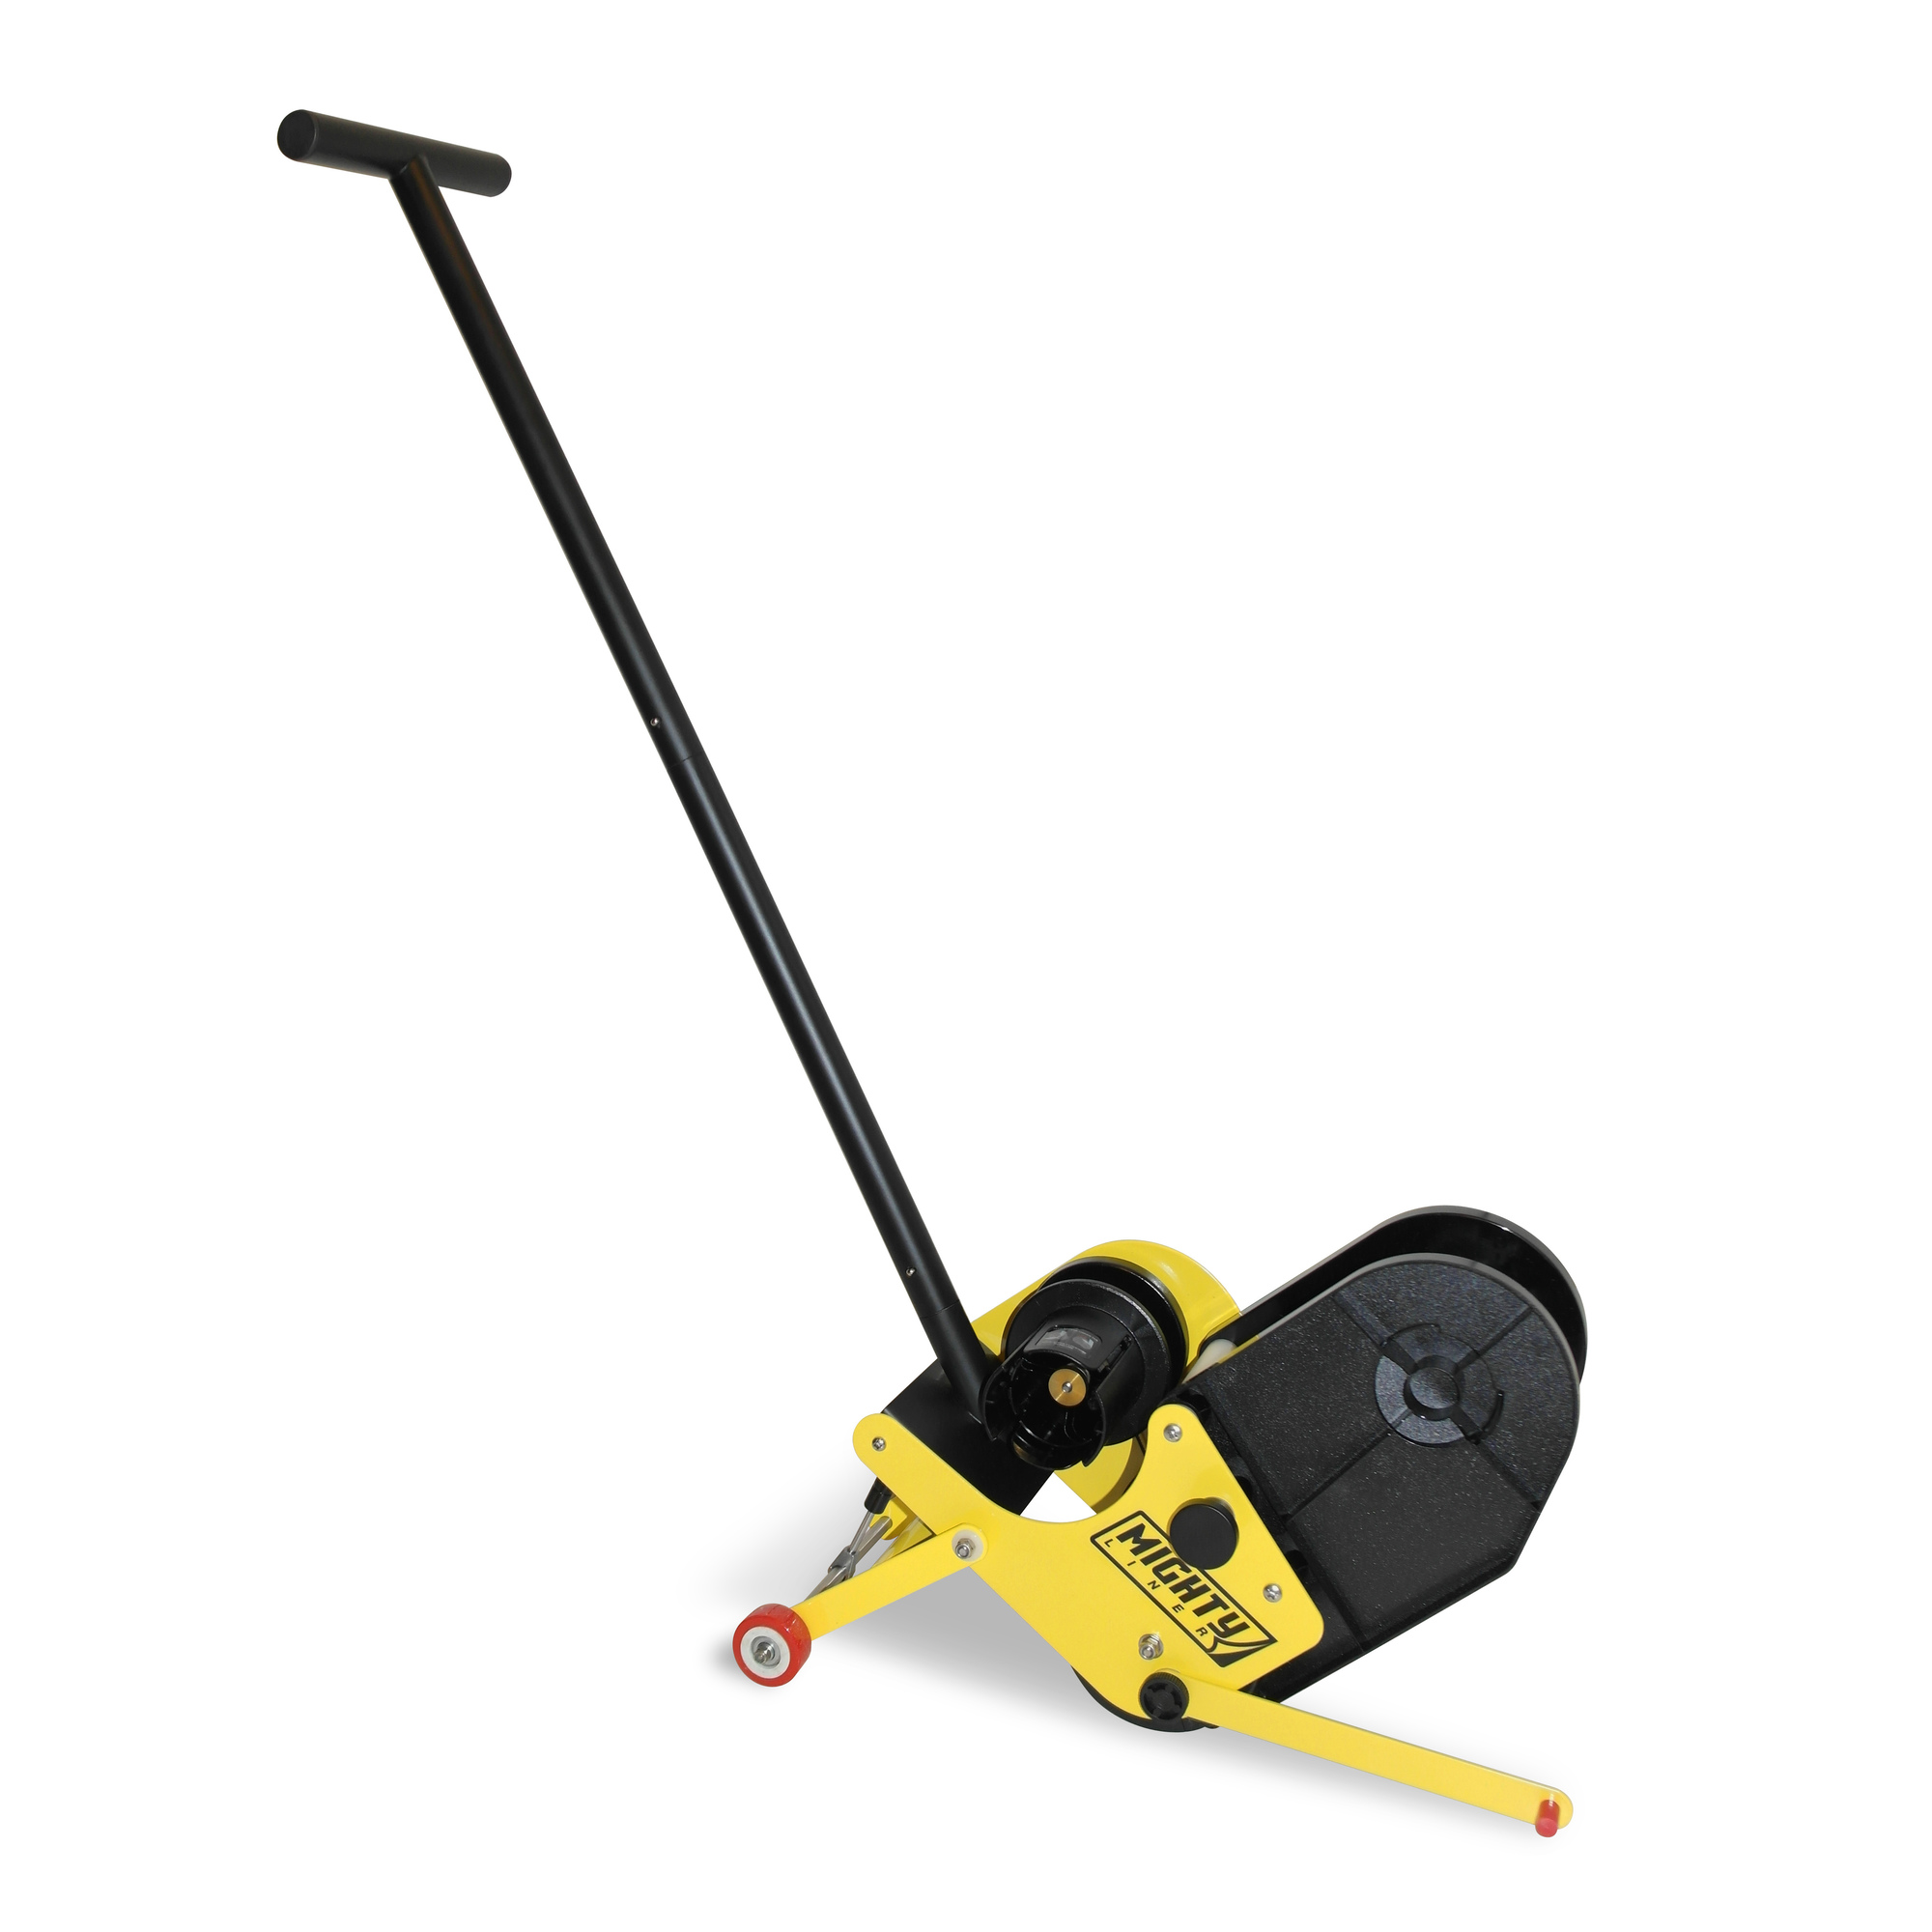 Mighty Line Floor Tape Applicator for 2Inch, 3Inch, 4Inch Wide Tape, Yellow, Model Mliner